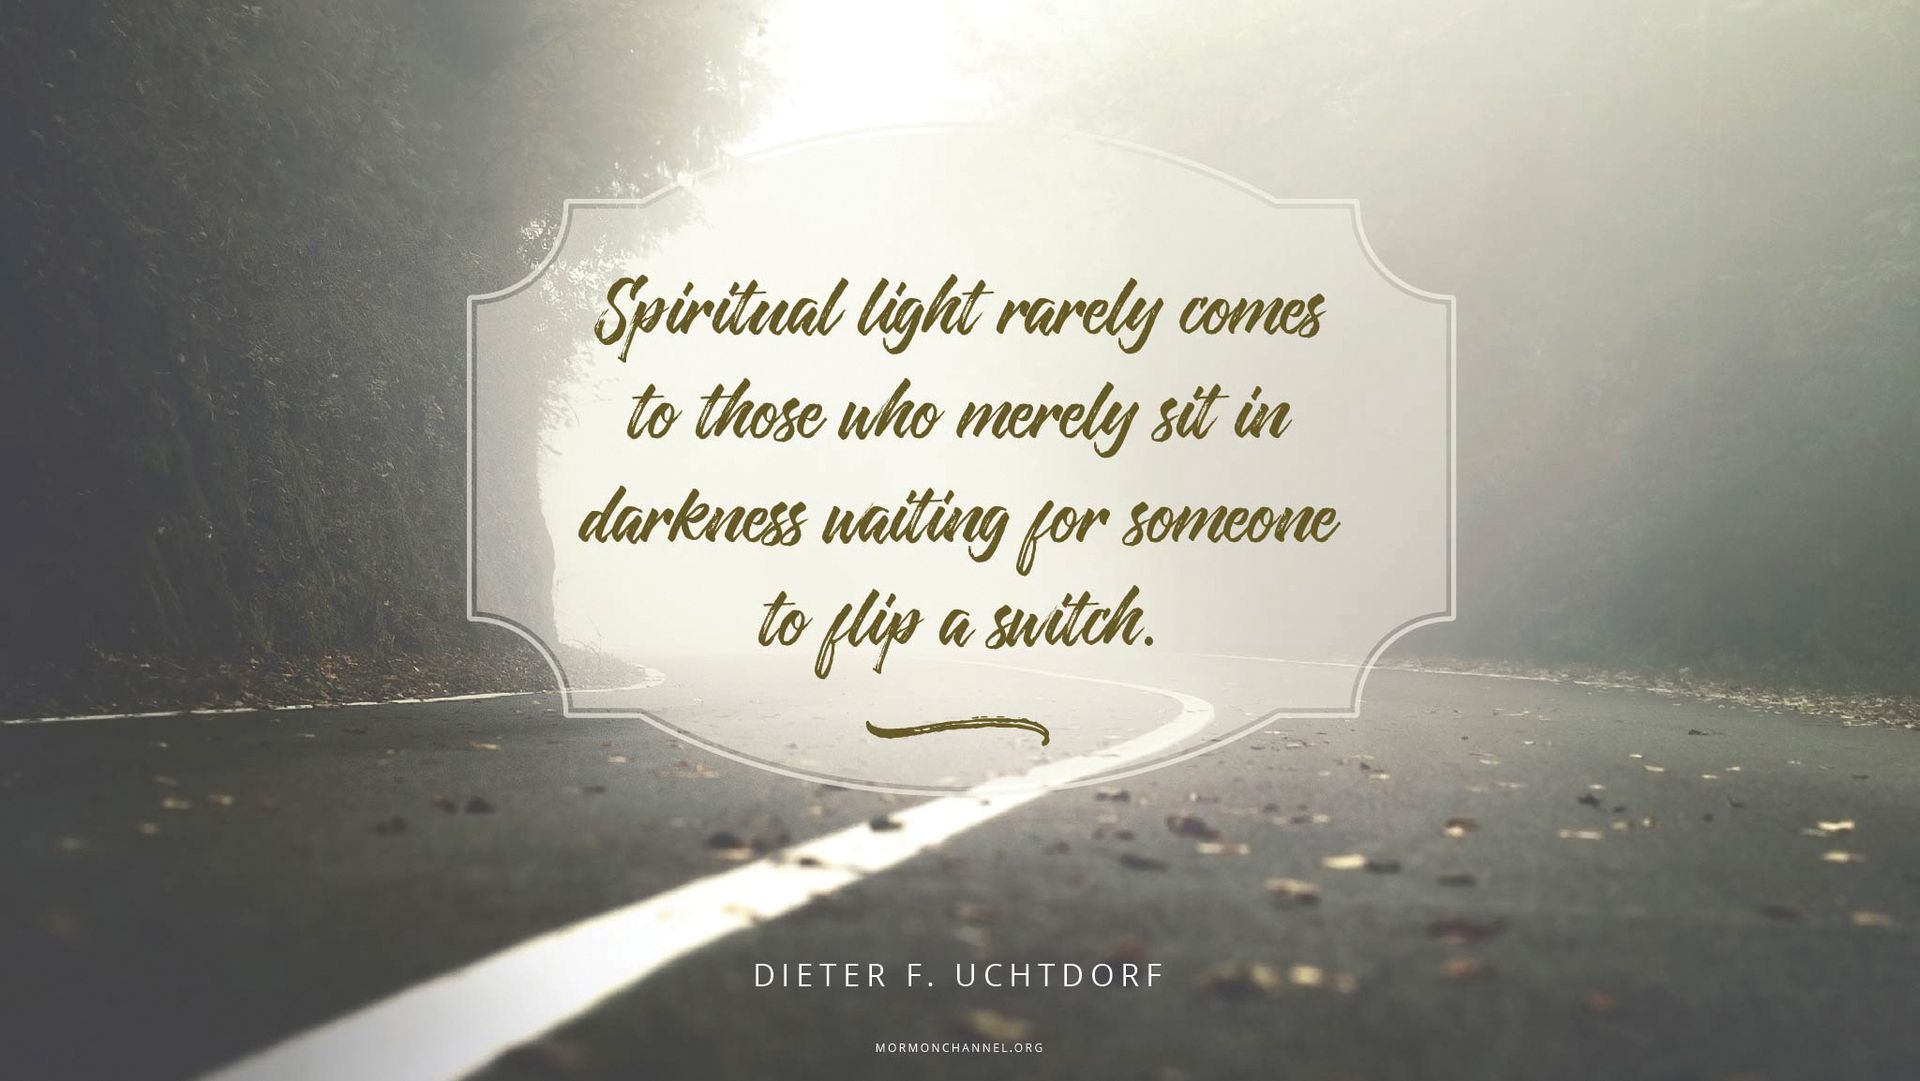 “Spiritual light rarely comes to those who merely sit in darkness waiting for someone to flip a switch.”—President Dieter F. Uchtdorf, “Step into the Light”